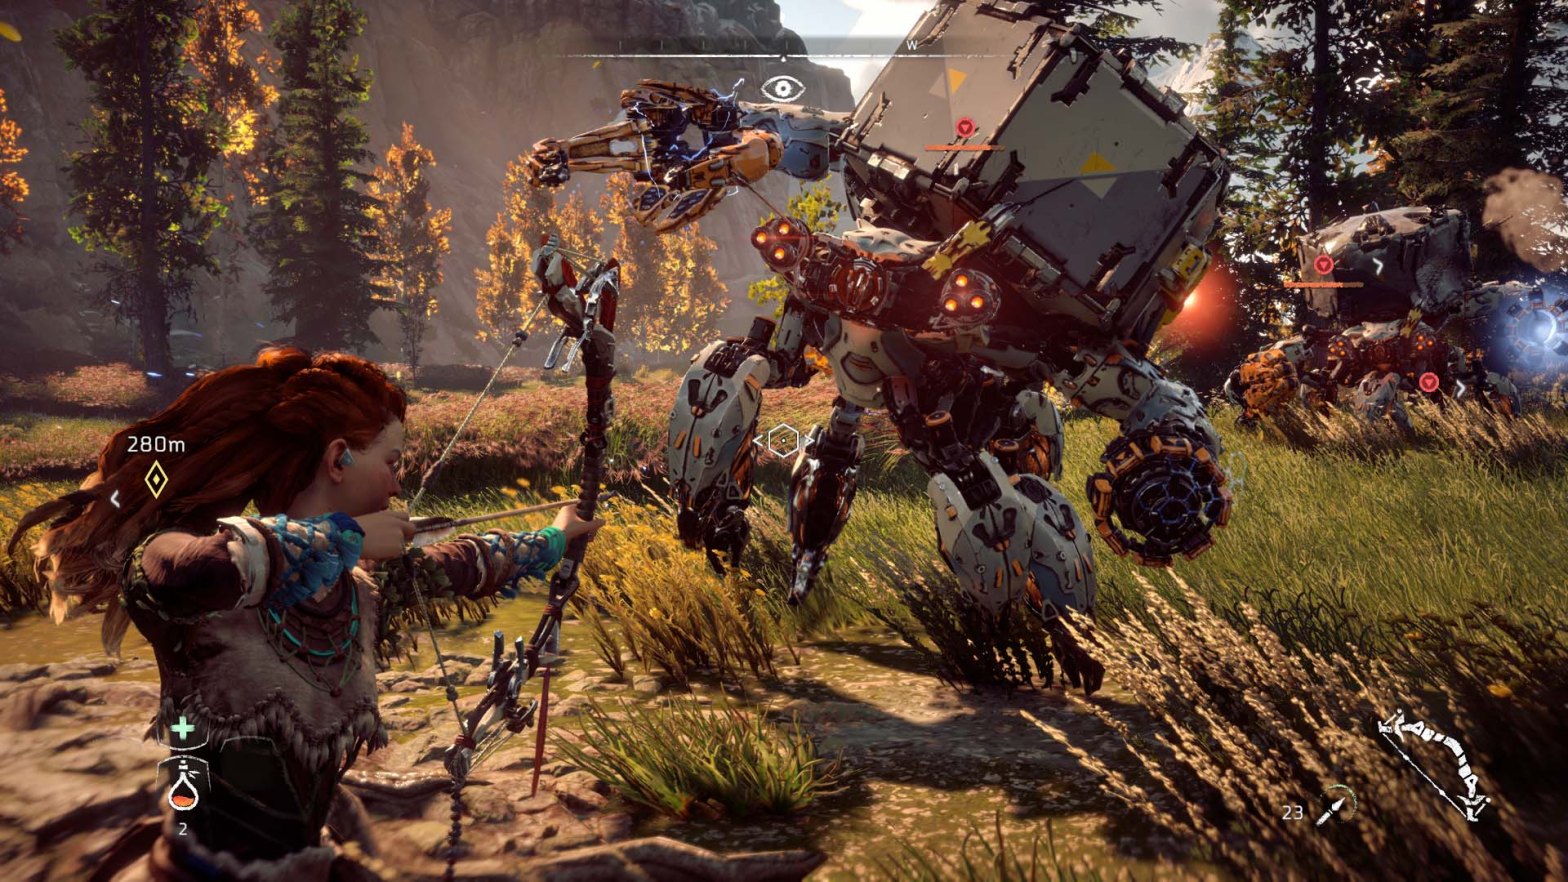 Horizon Zero Dawn New Gameplay Video Shows More Exciting Open World Action